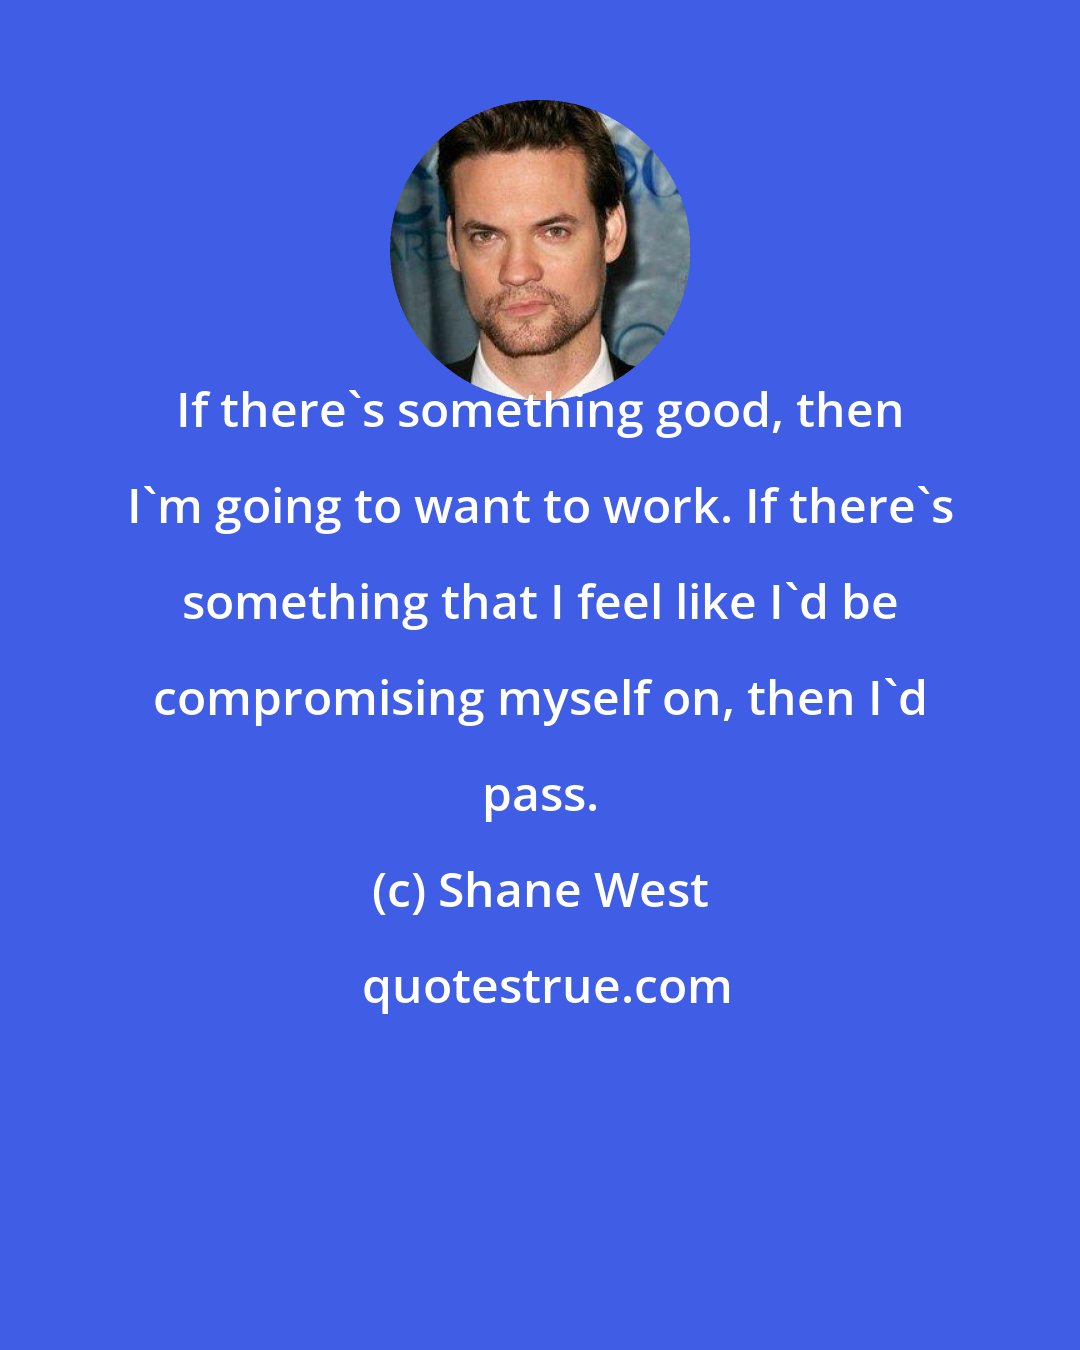 Shane West: If there's something good, then I'm going to want to work. If there's something that I feel like I'd be compromising myself on, then I'd pass.